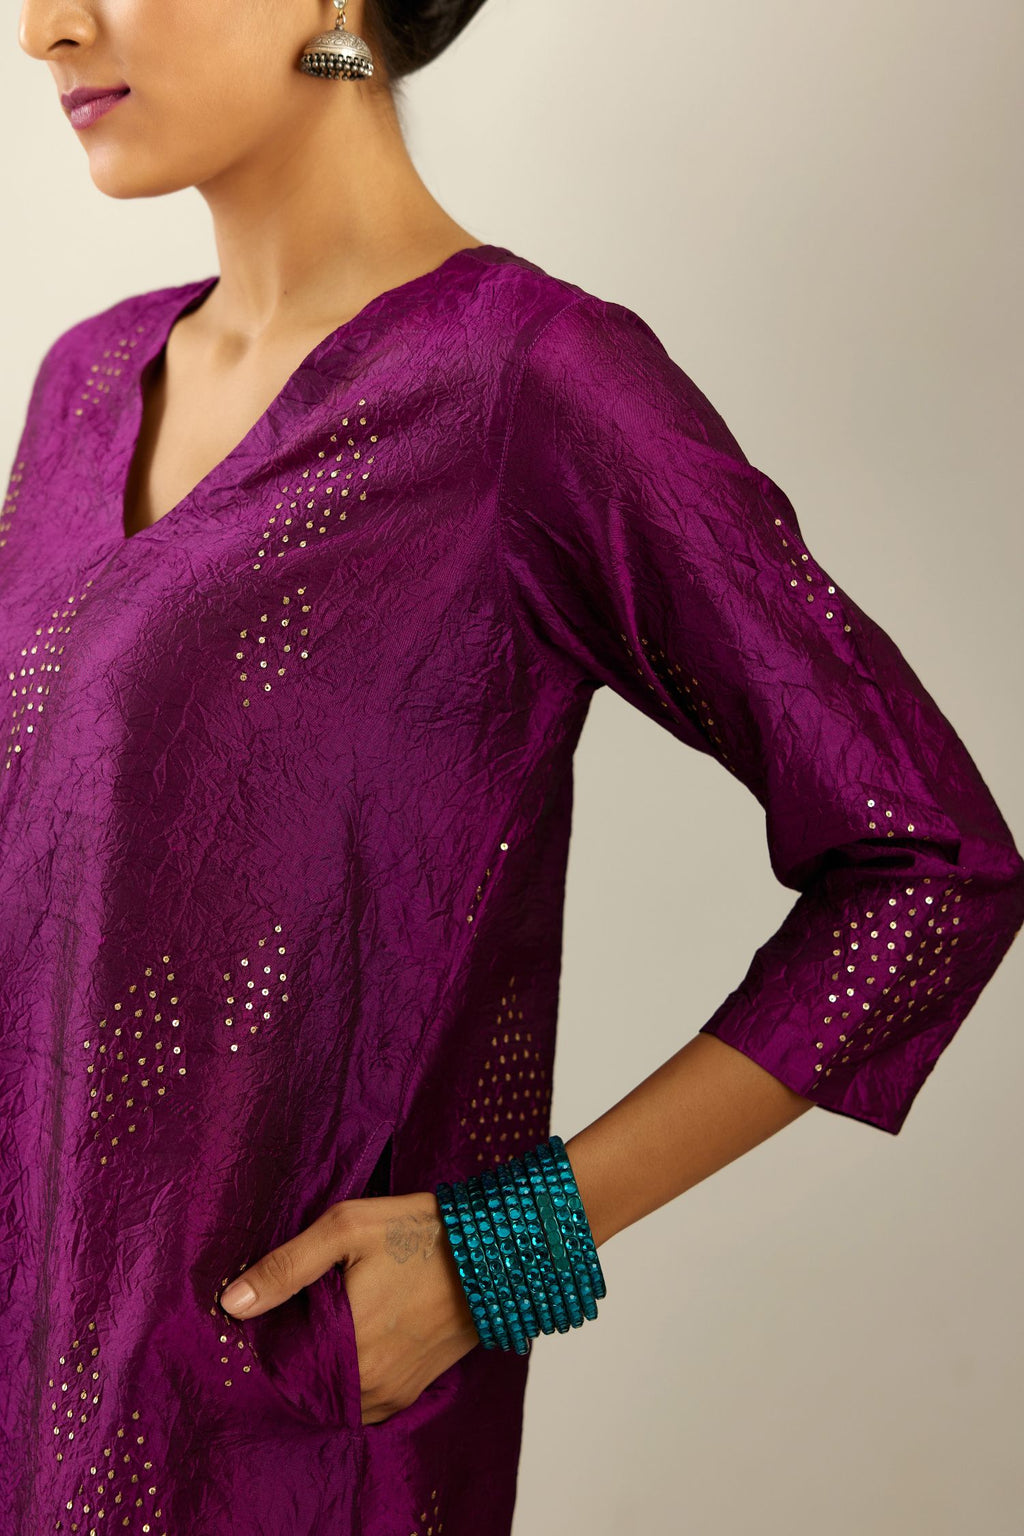 Sangria silk hand crushed A-line kurta set with asymmetric hem, highlighted with all-over gold sequins diamonds.